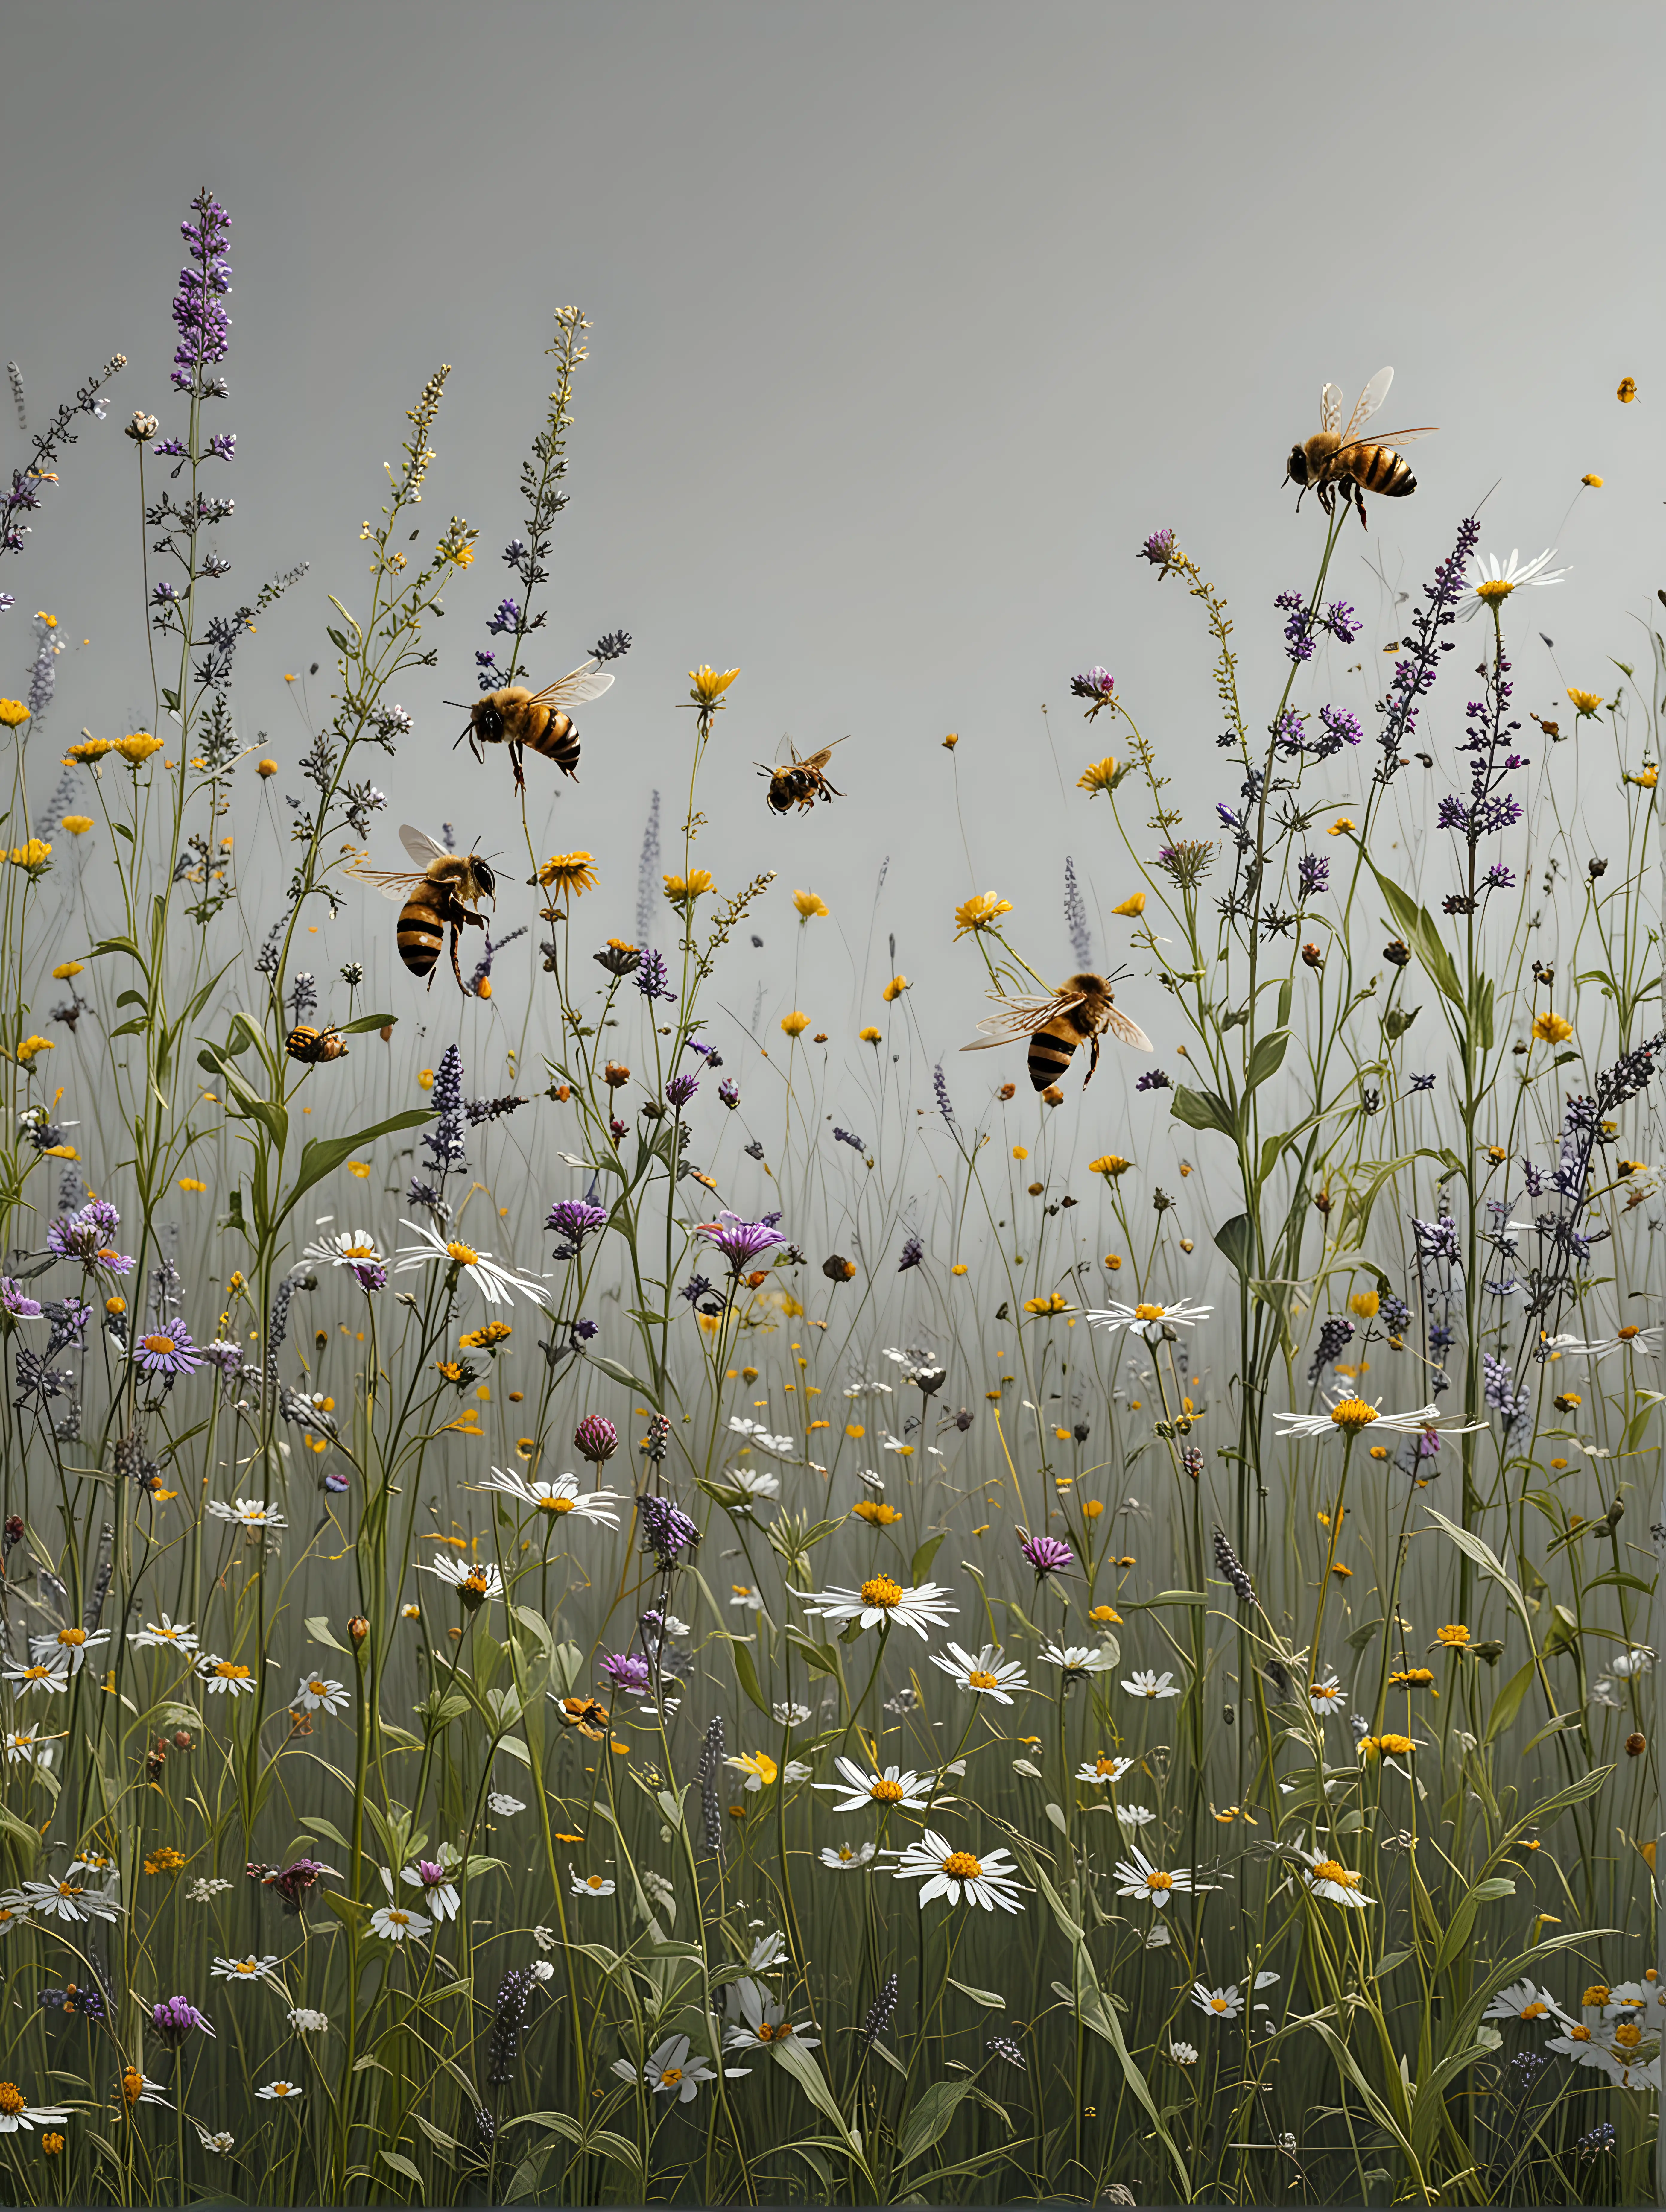 Bees Pollinating Meadow Wildflowers on Neutral Gray Background